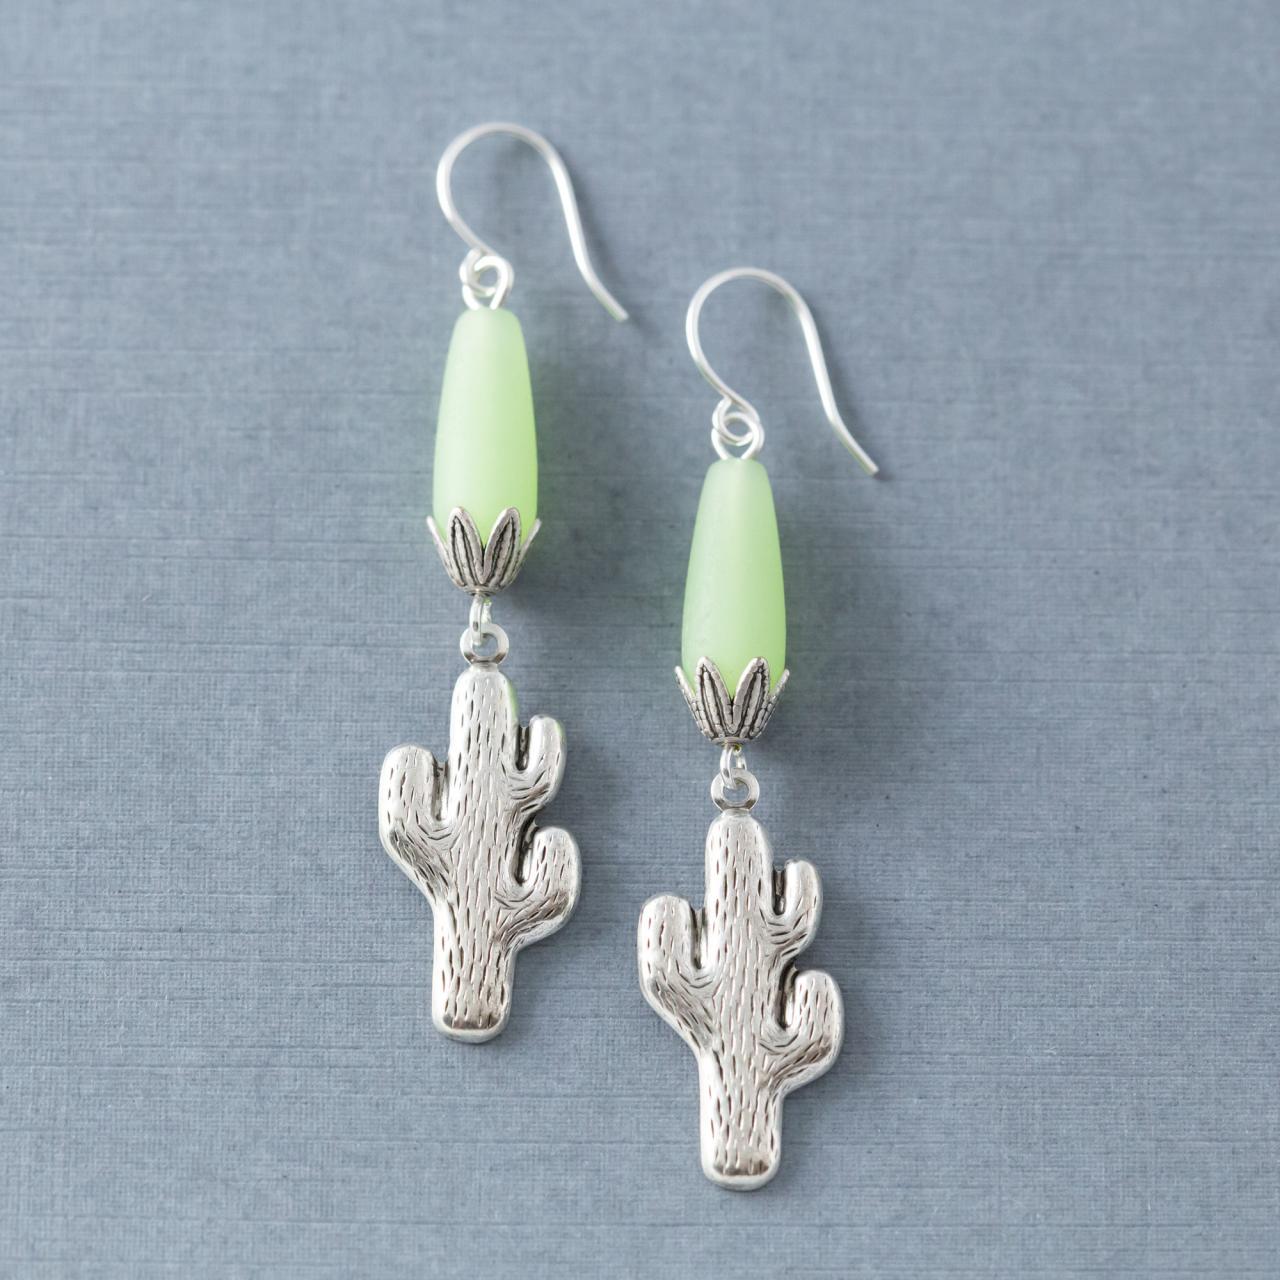 Silver Tone Cactus Plant Earrings With Mint Green Recycled Glass Beads, Desert Earrings, Cactus Jewelry